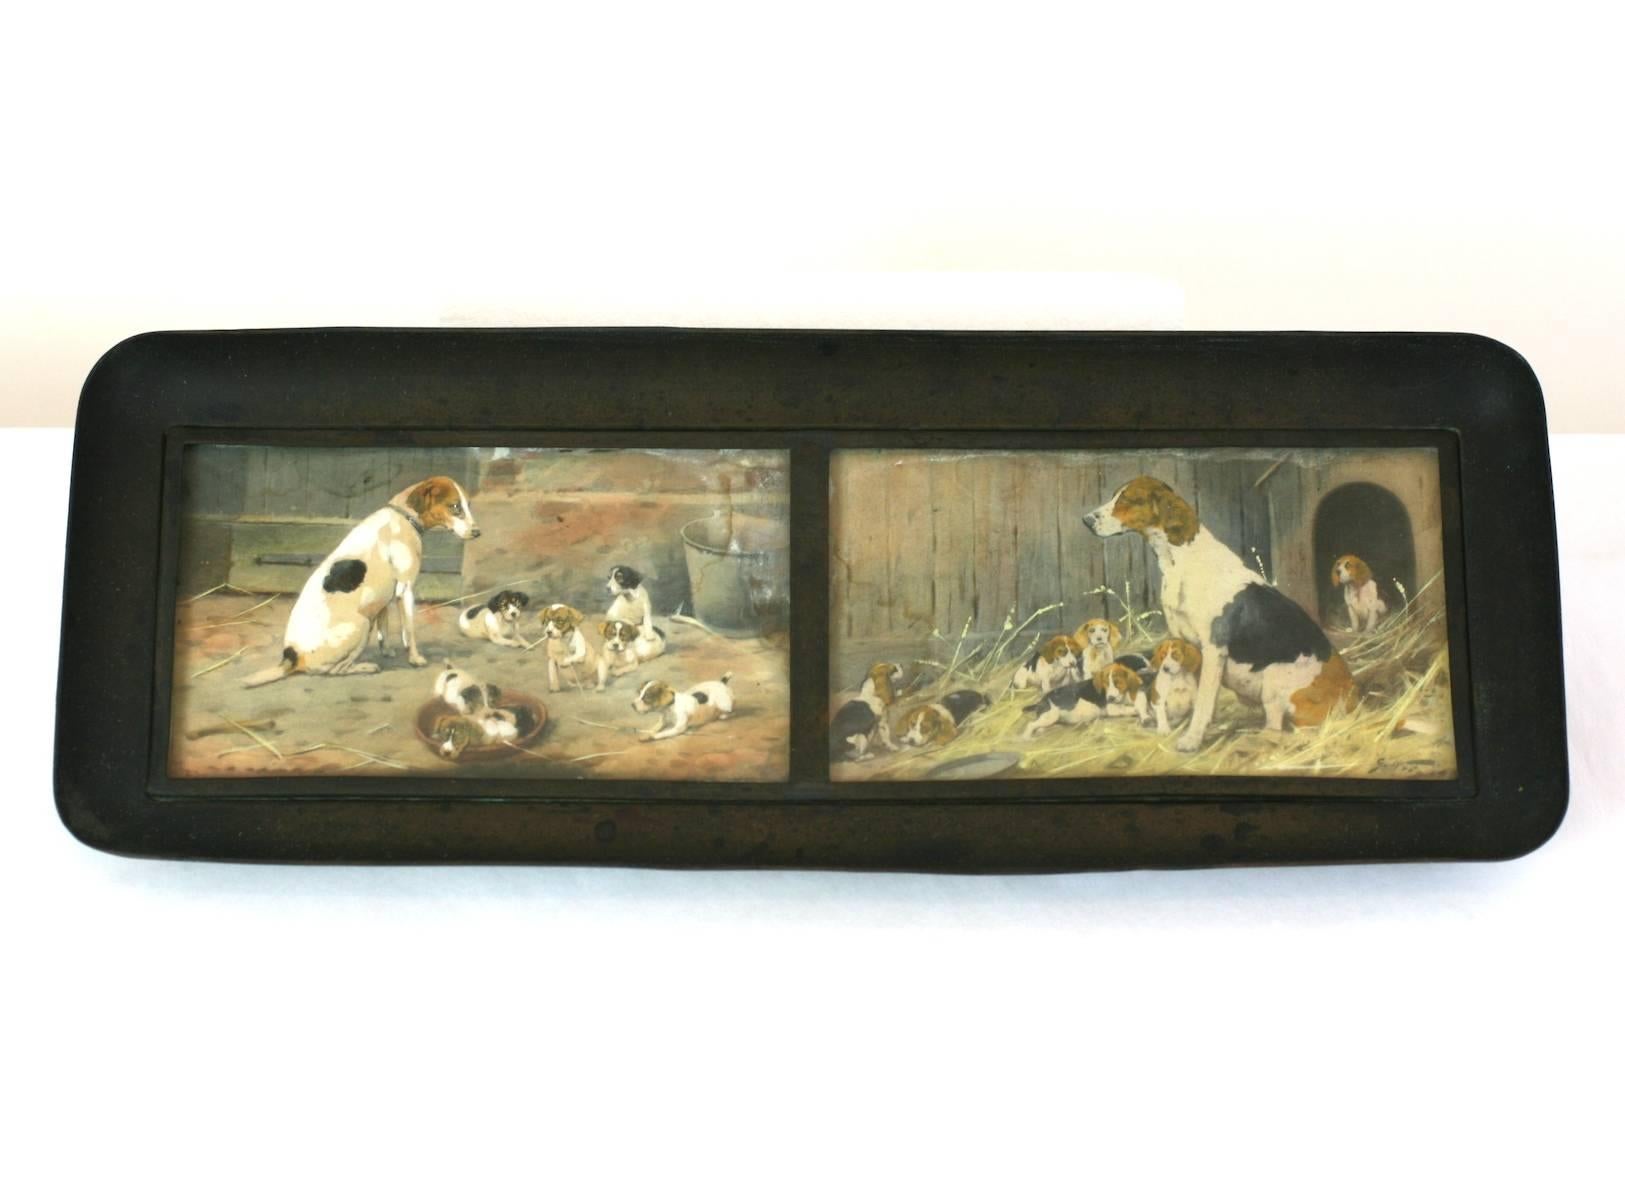 Hand painted bronze pen tray with wonderful watercolor barnyard scenes of hounds with their large litters. Beautifully painted watercolor panels set under glass panels for protection. Heavy, simple bronze mount. 1910's USA. 
Very good condition.